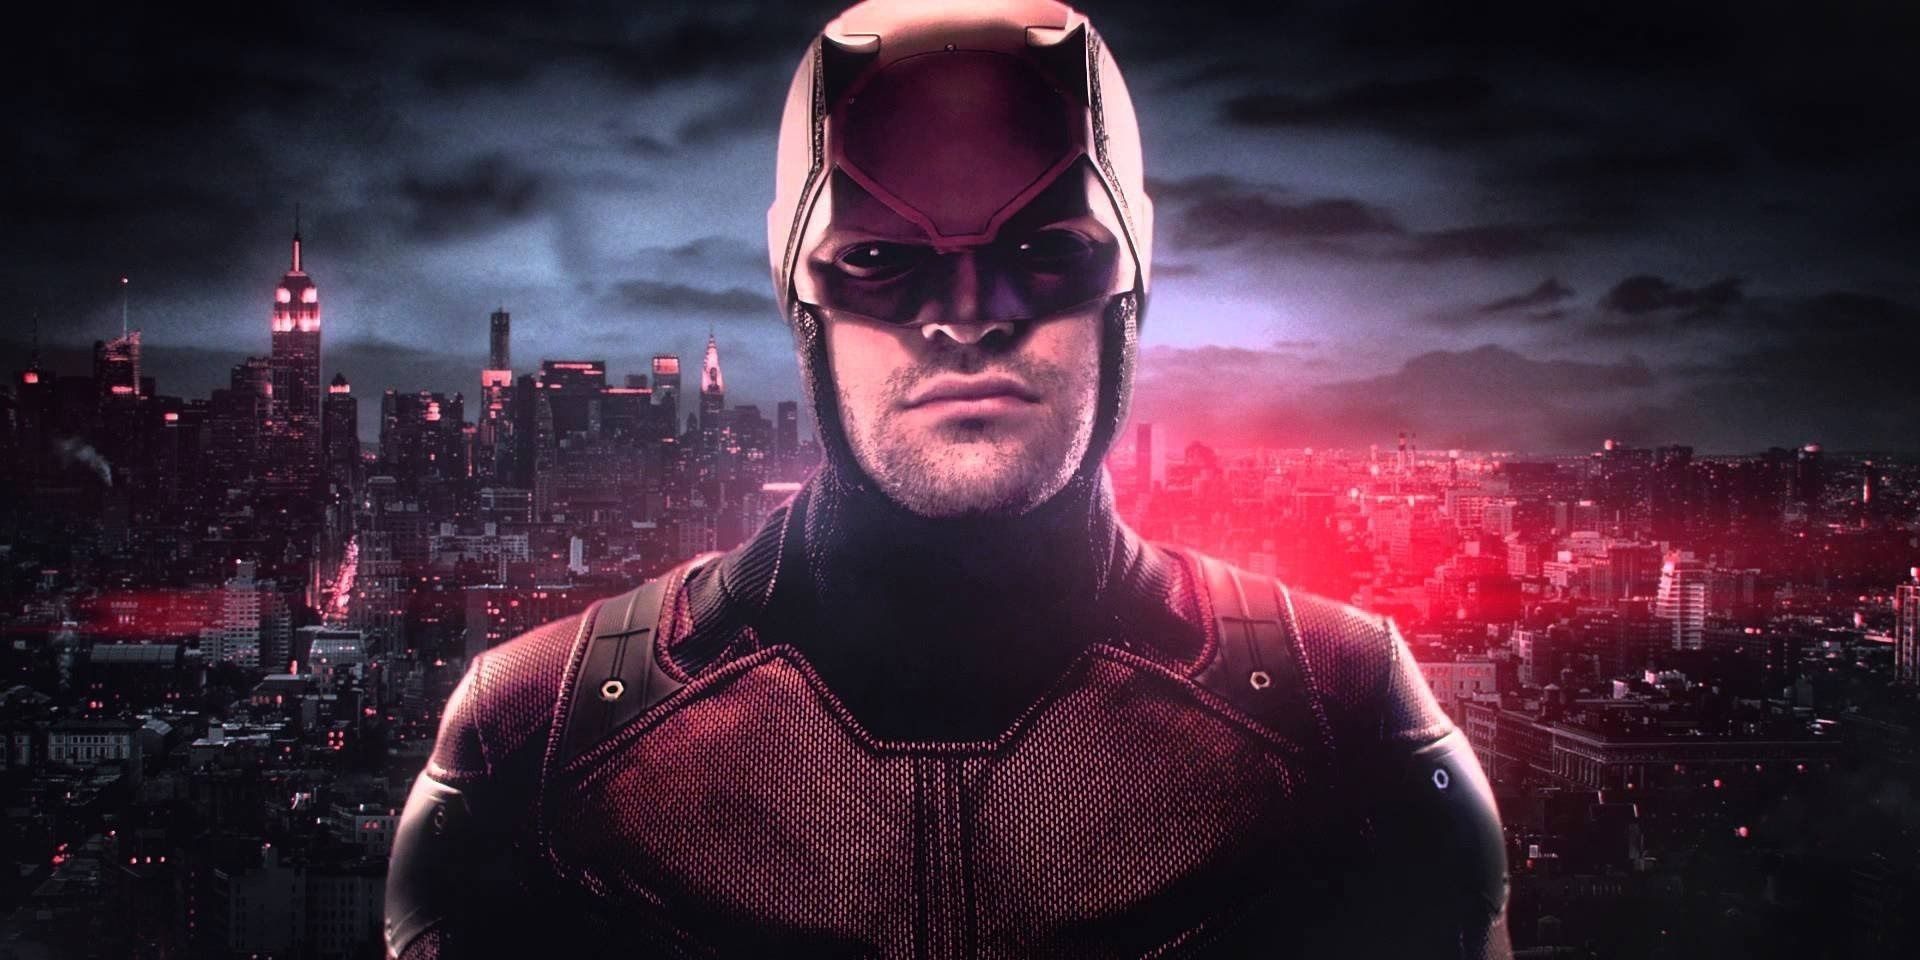 Charlie-Cox-as-Daredevil-in-a-promotiona